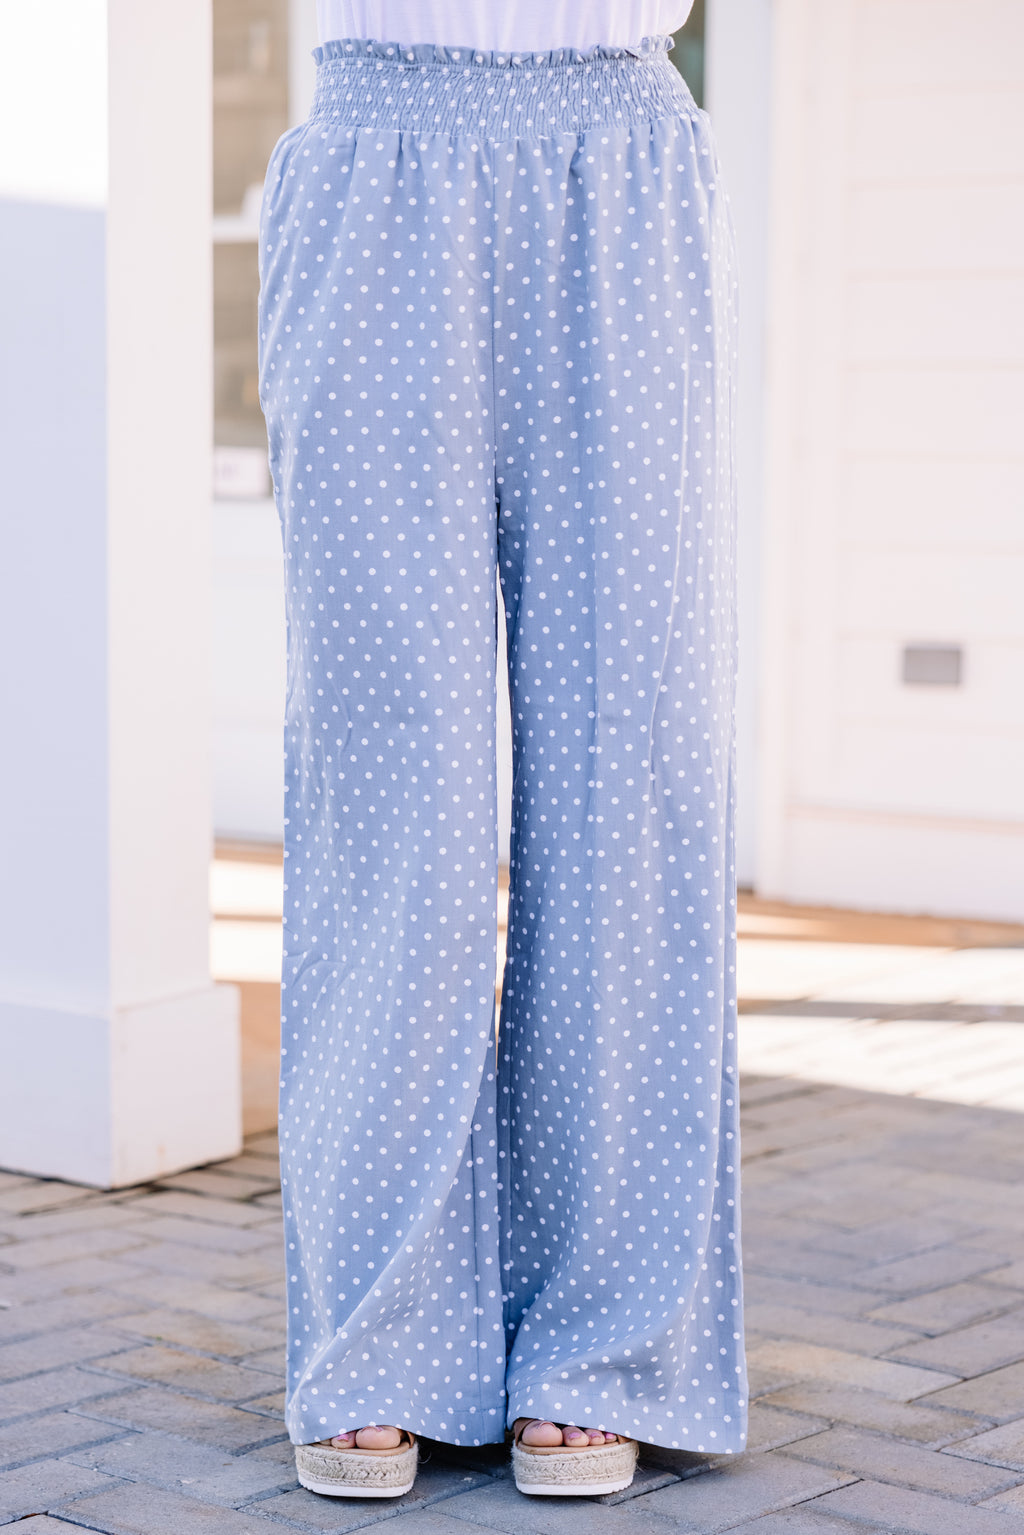 A New Day Polka Dots Blue Casual Pants Size 12 - 59% off